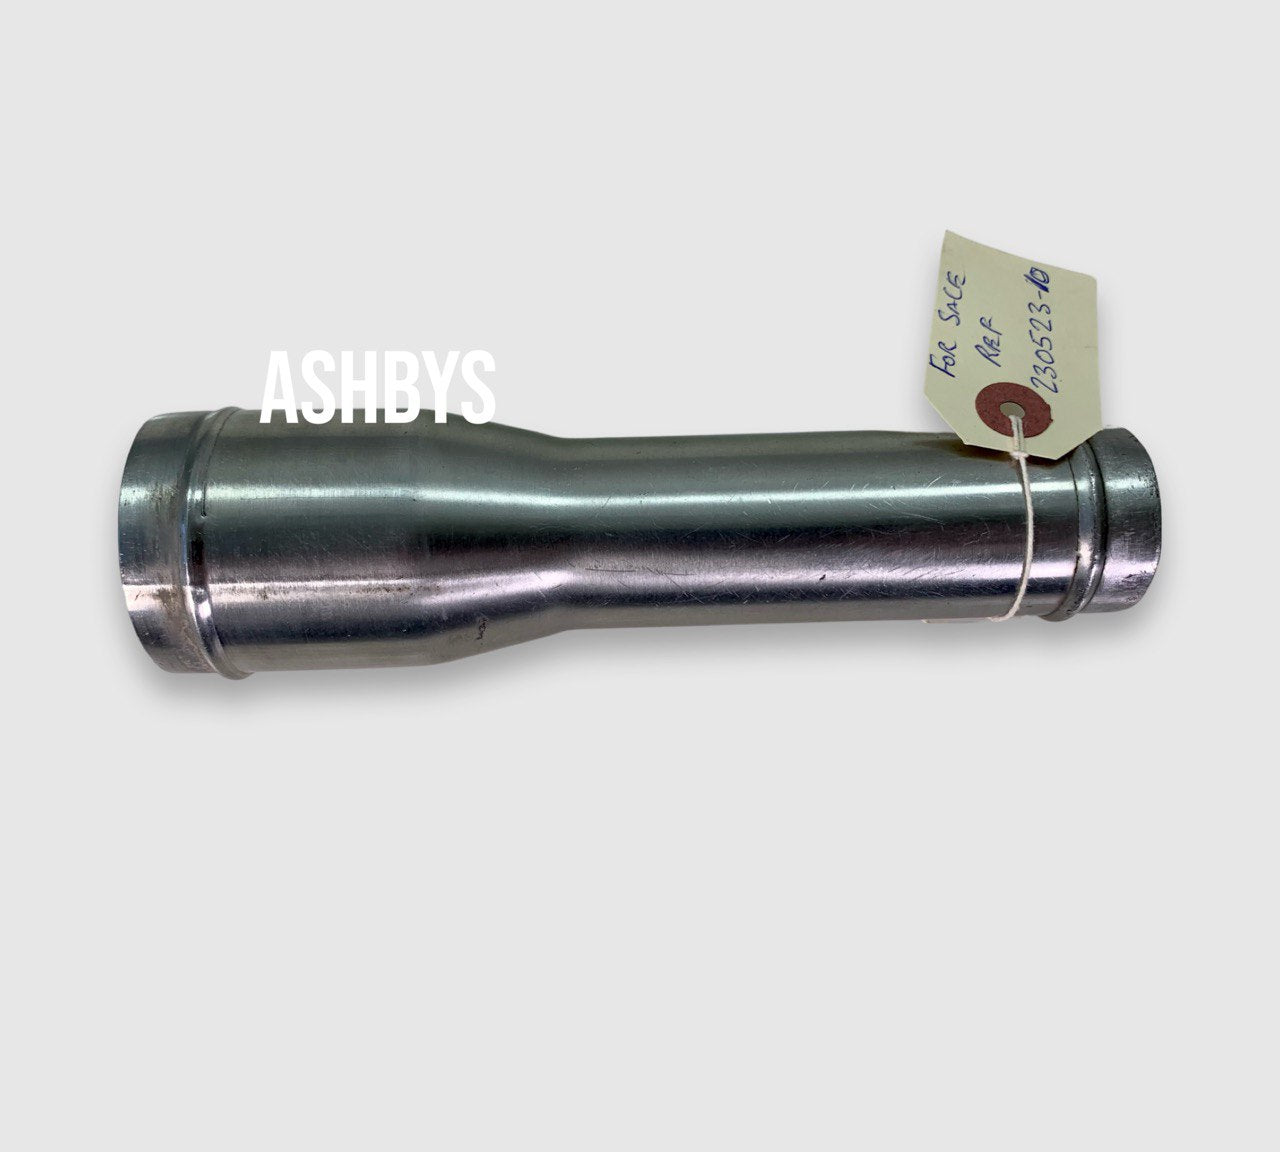 PRE-OWNED Stainless Steel Joining Tube - 2” inch / 52 mm to 1.5” inch / 38 mm - for Vacuum Hose